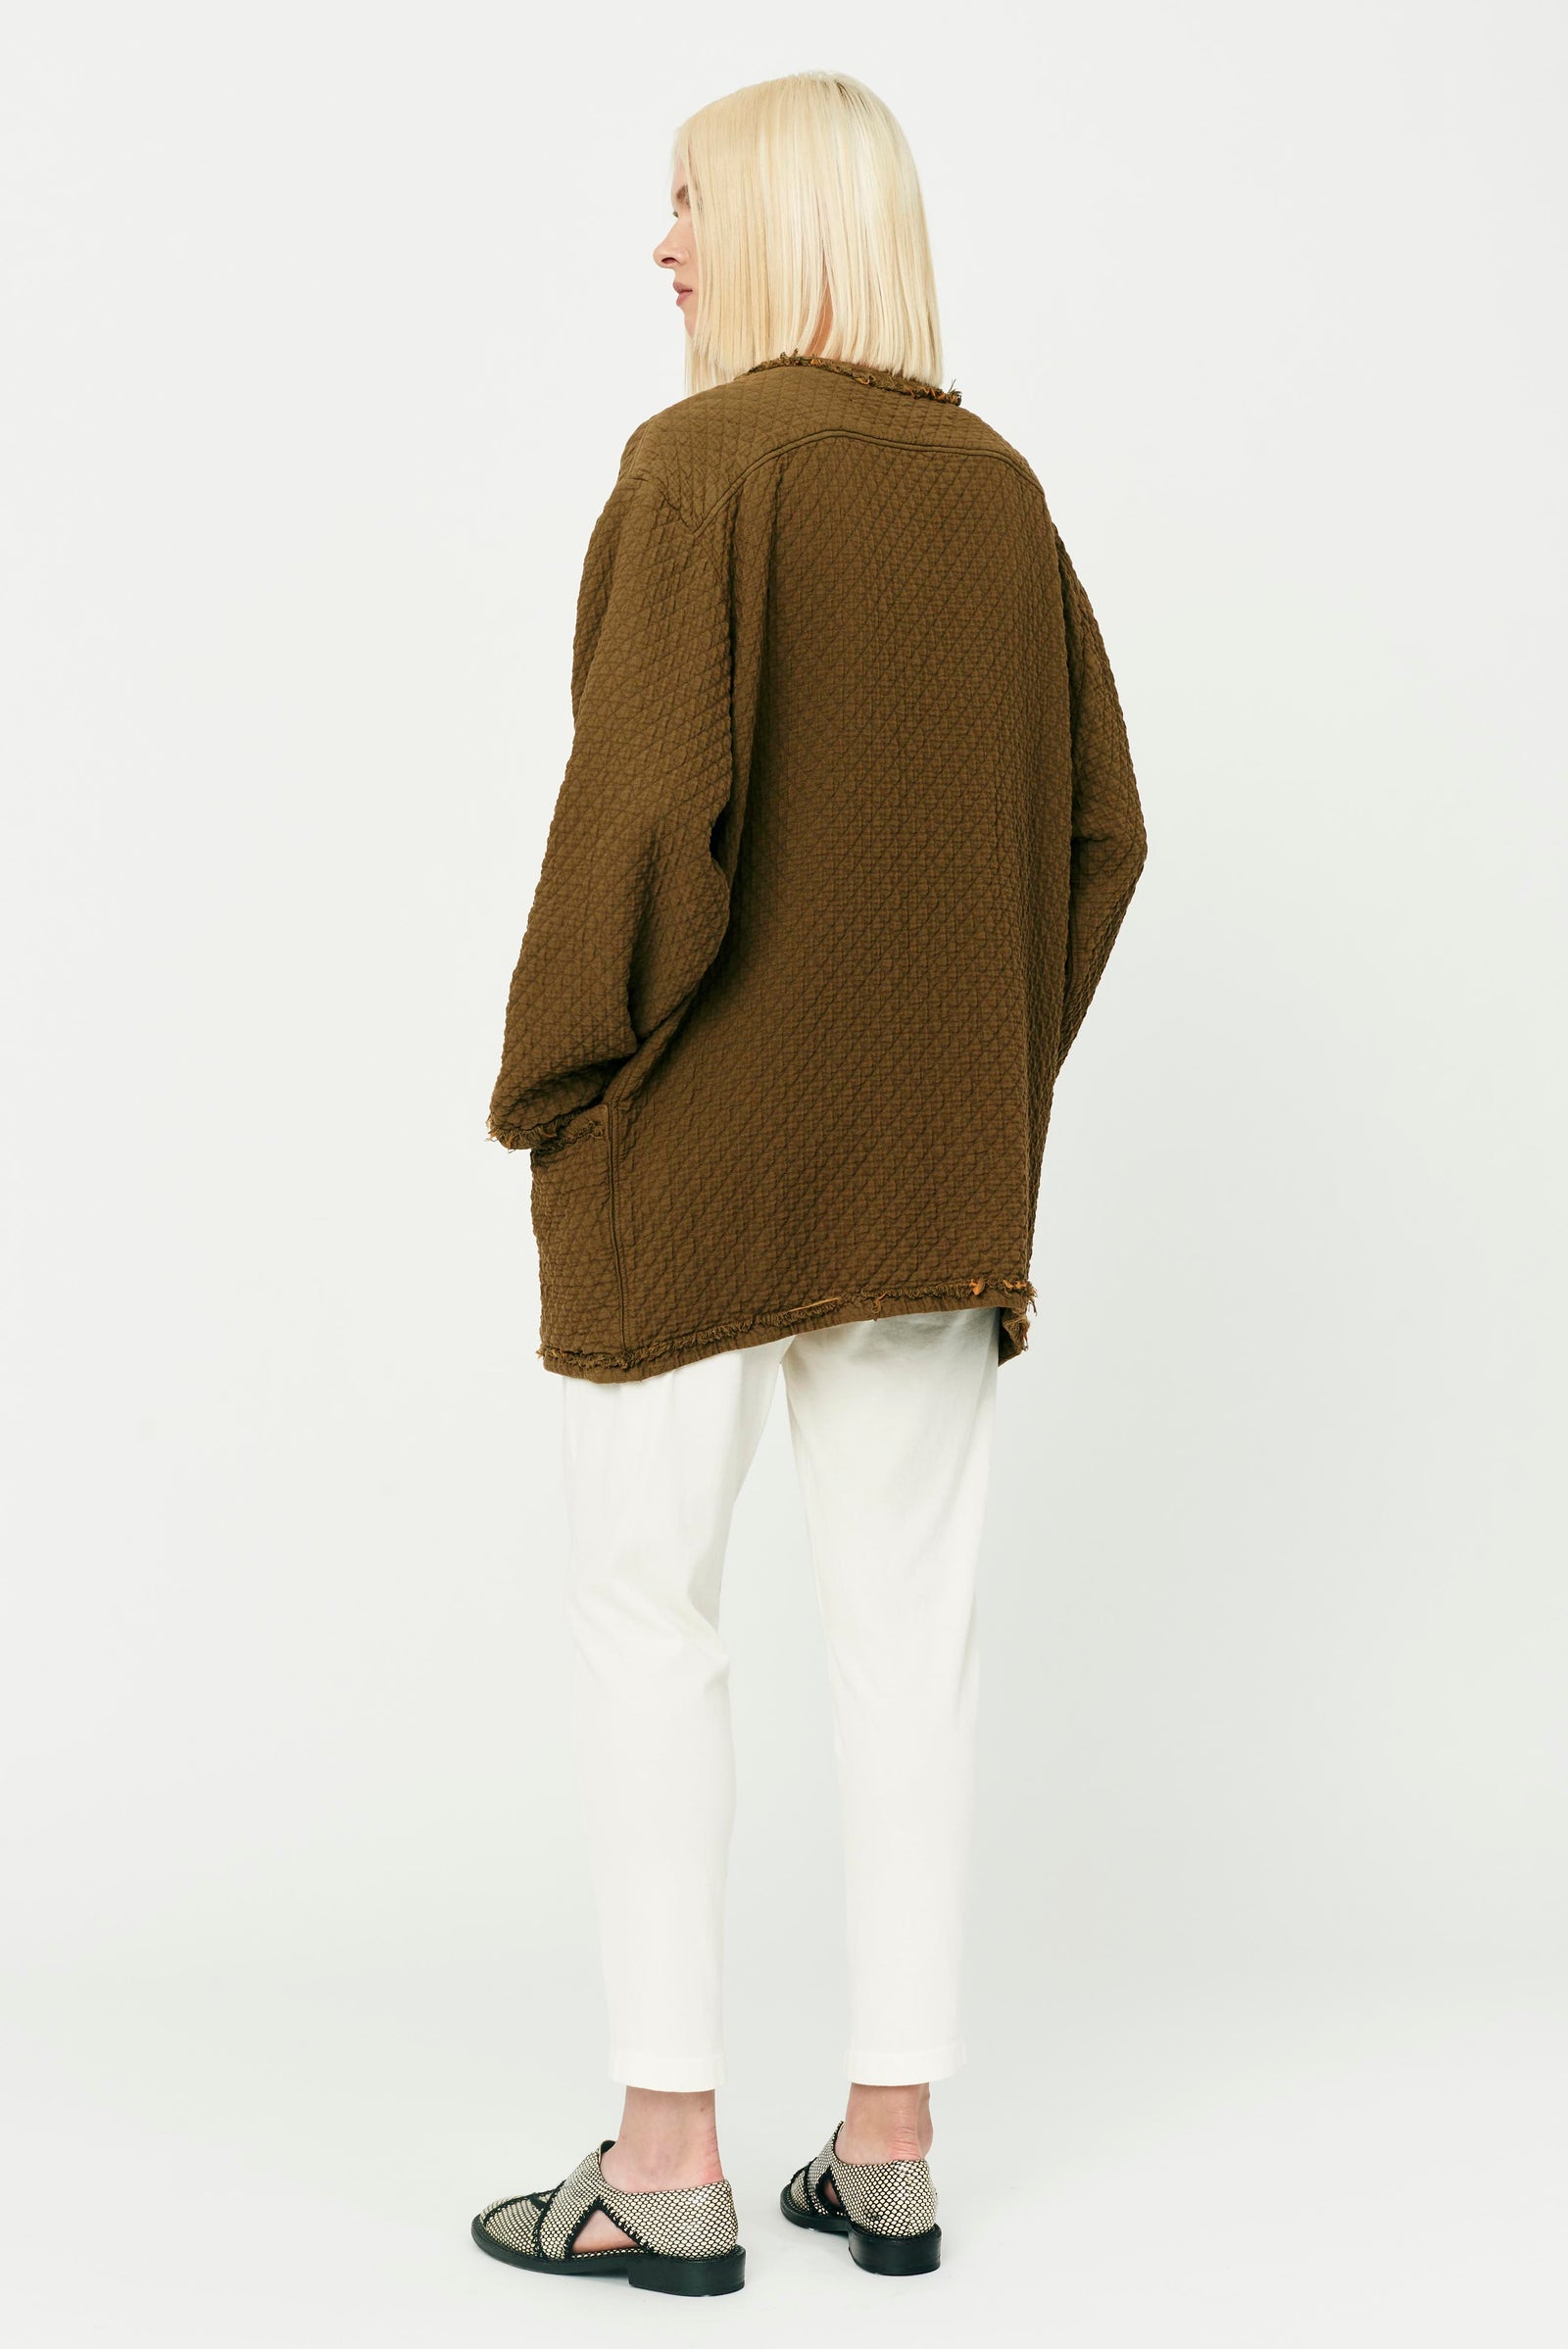 Tobacco Chama River Quilted Cotton Overcoat Full Back View